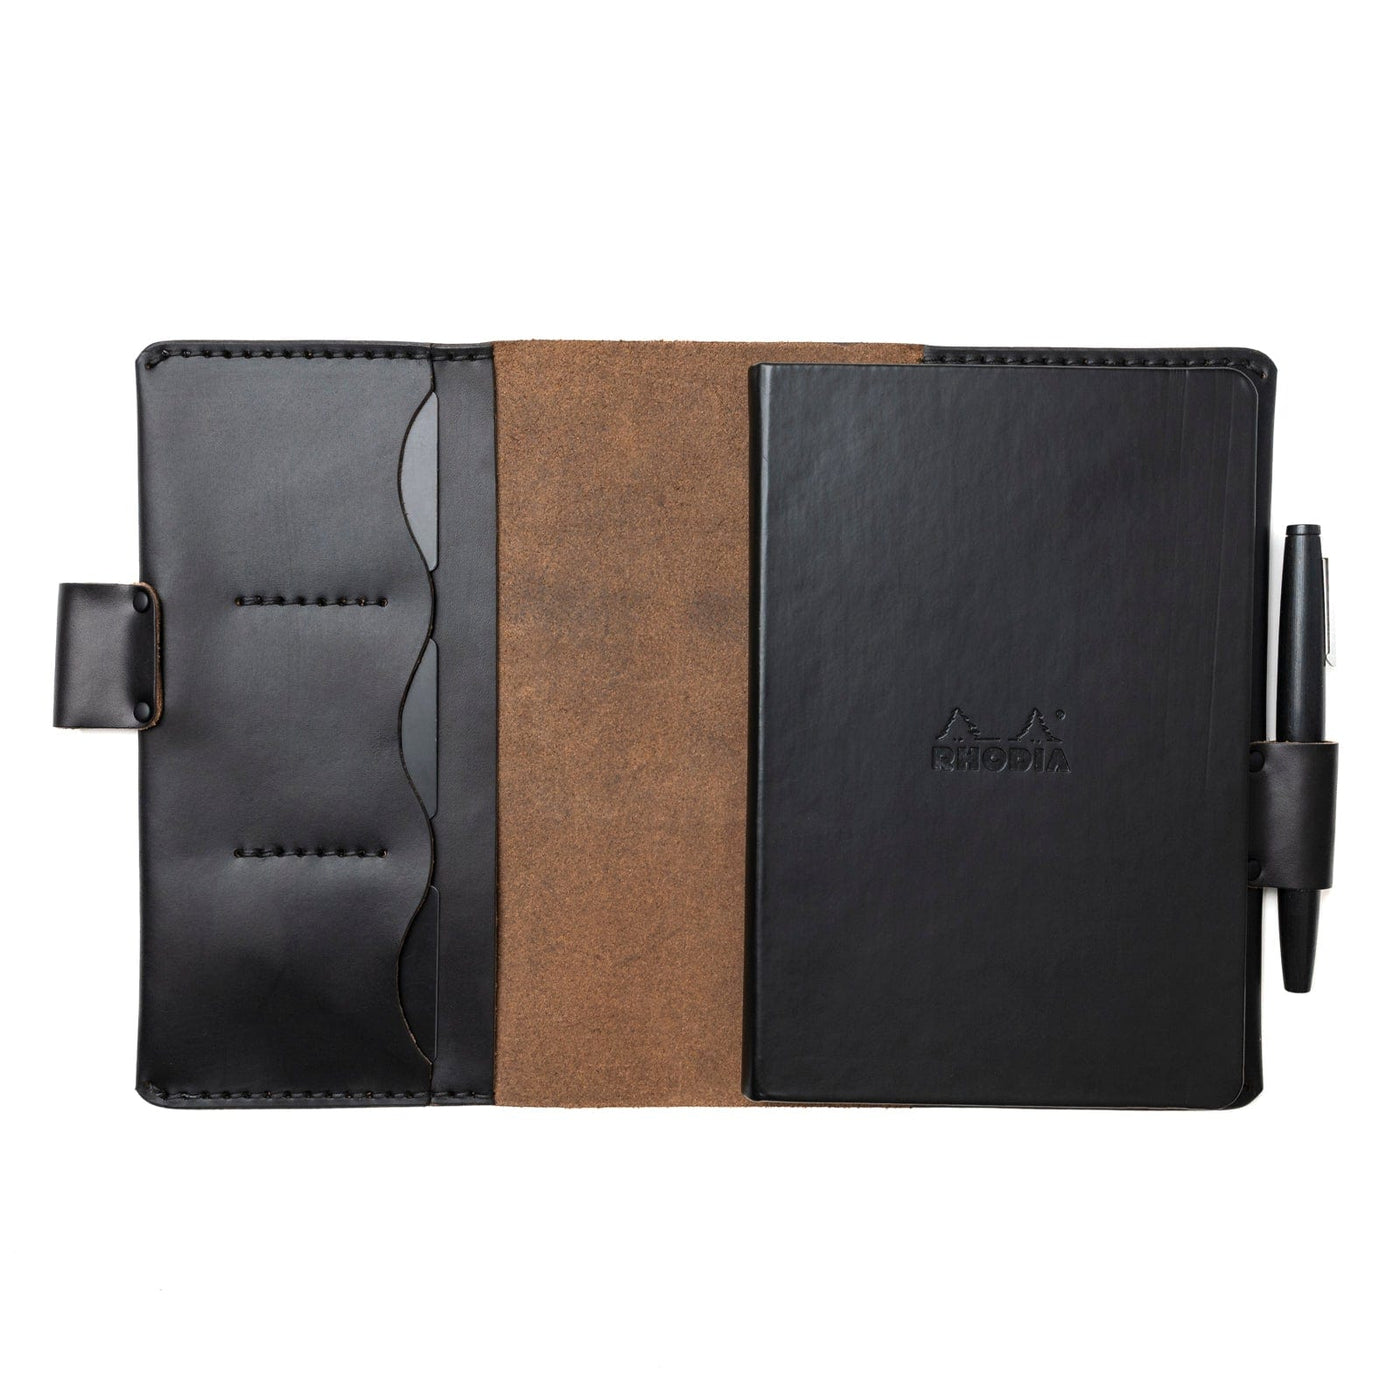 Leather Rhodia A5 Notebook Cover - Black Popov Leather